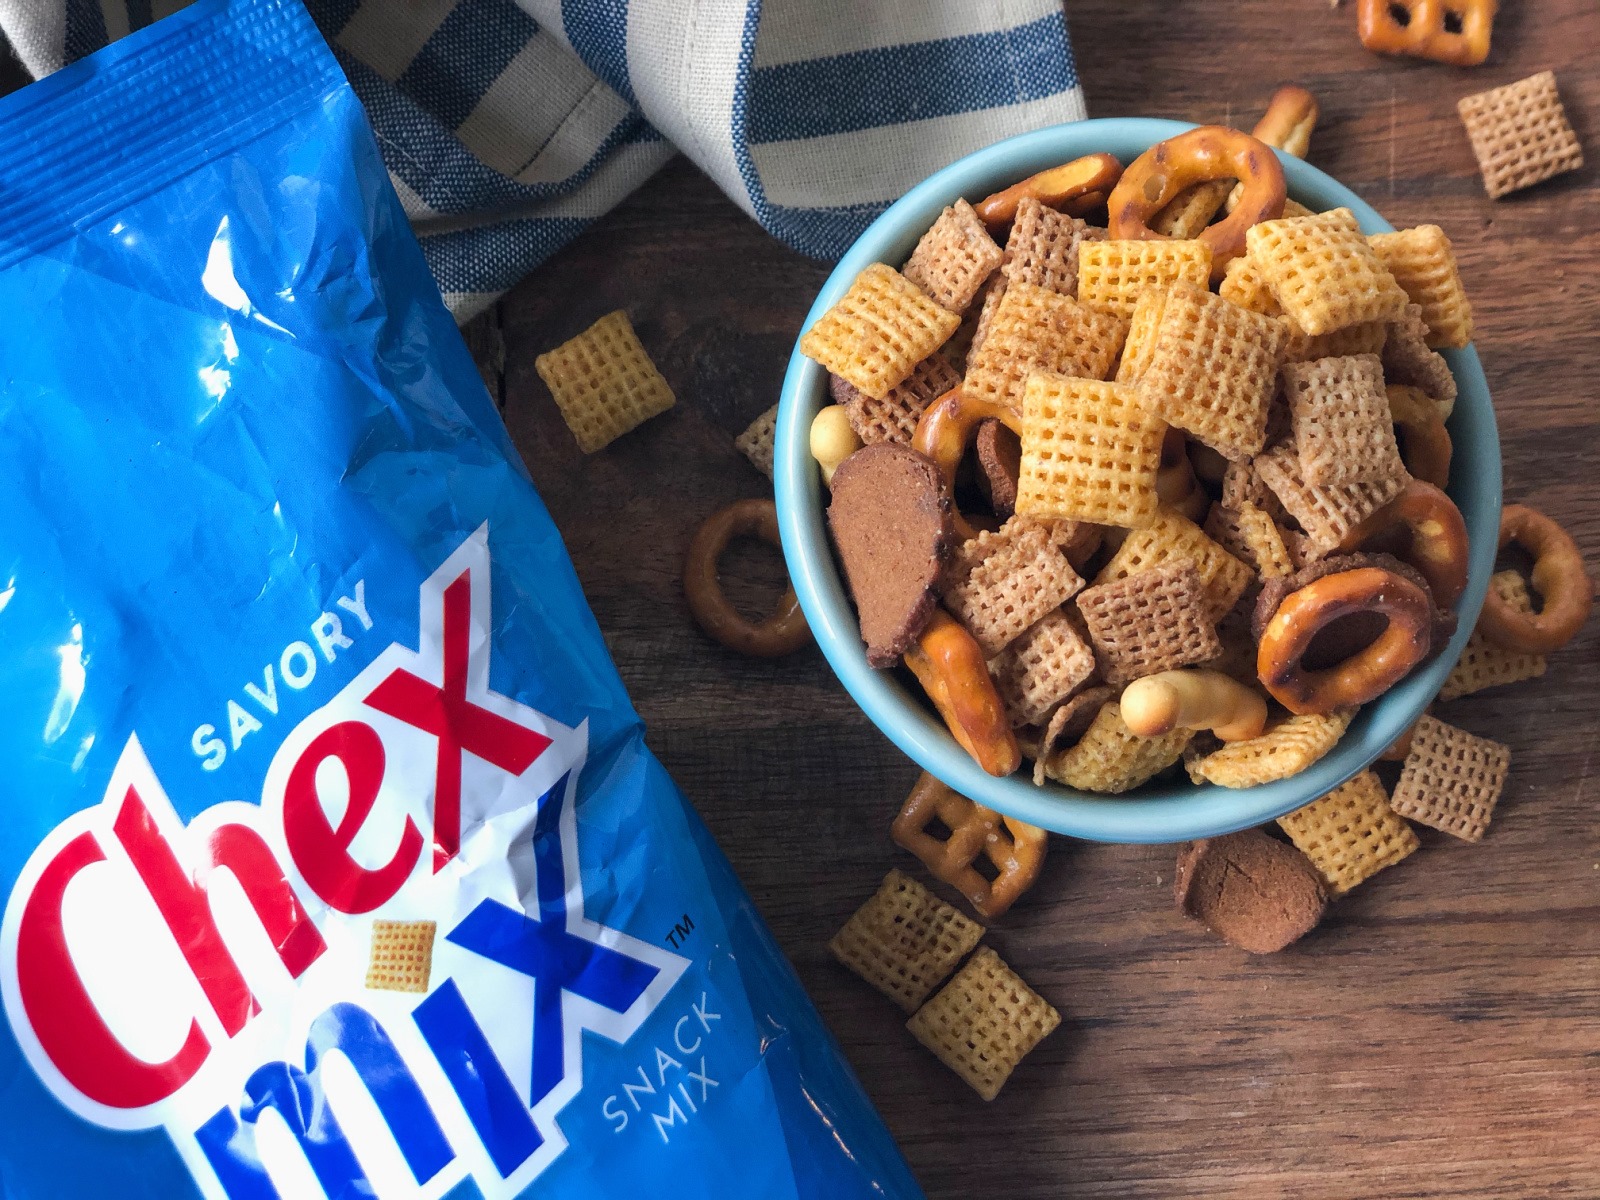 Bugles, Chex Mix Or Gardettos Snacks As Low As $1.49 At Kroger